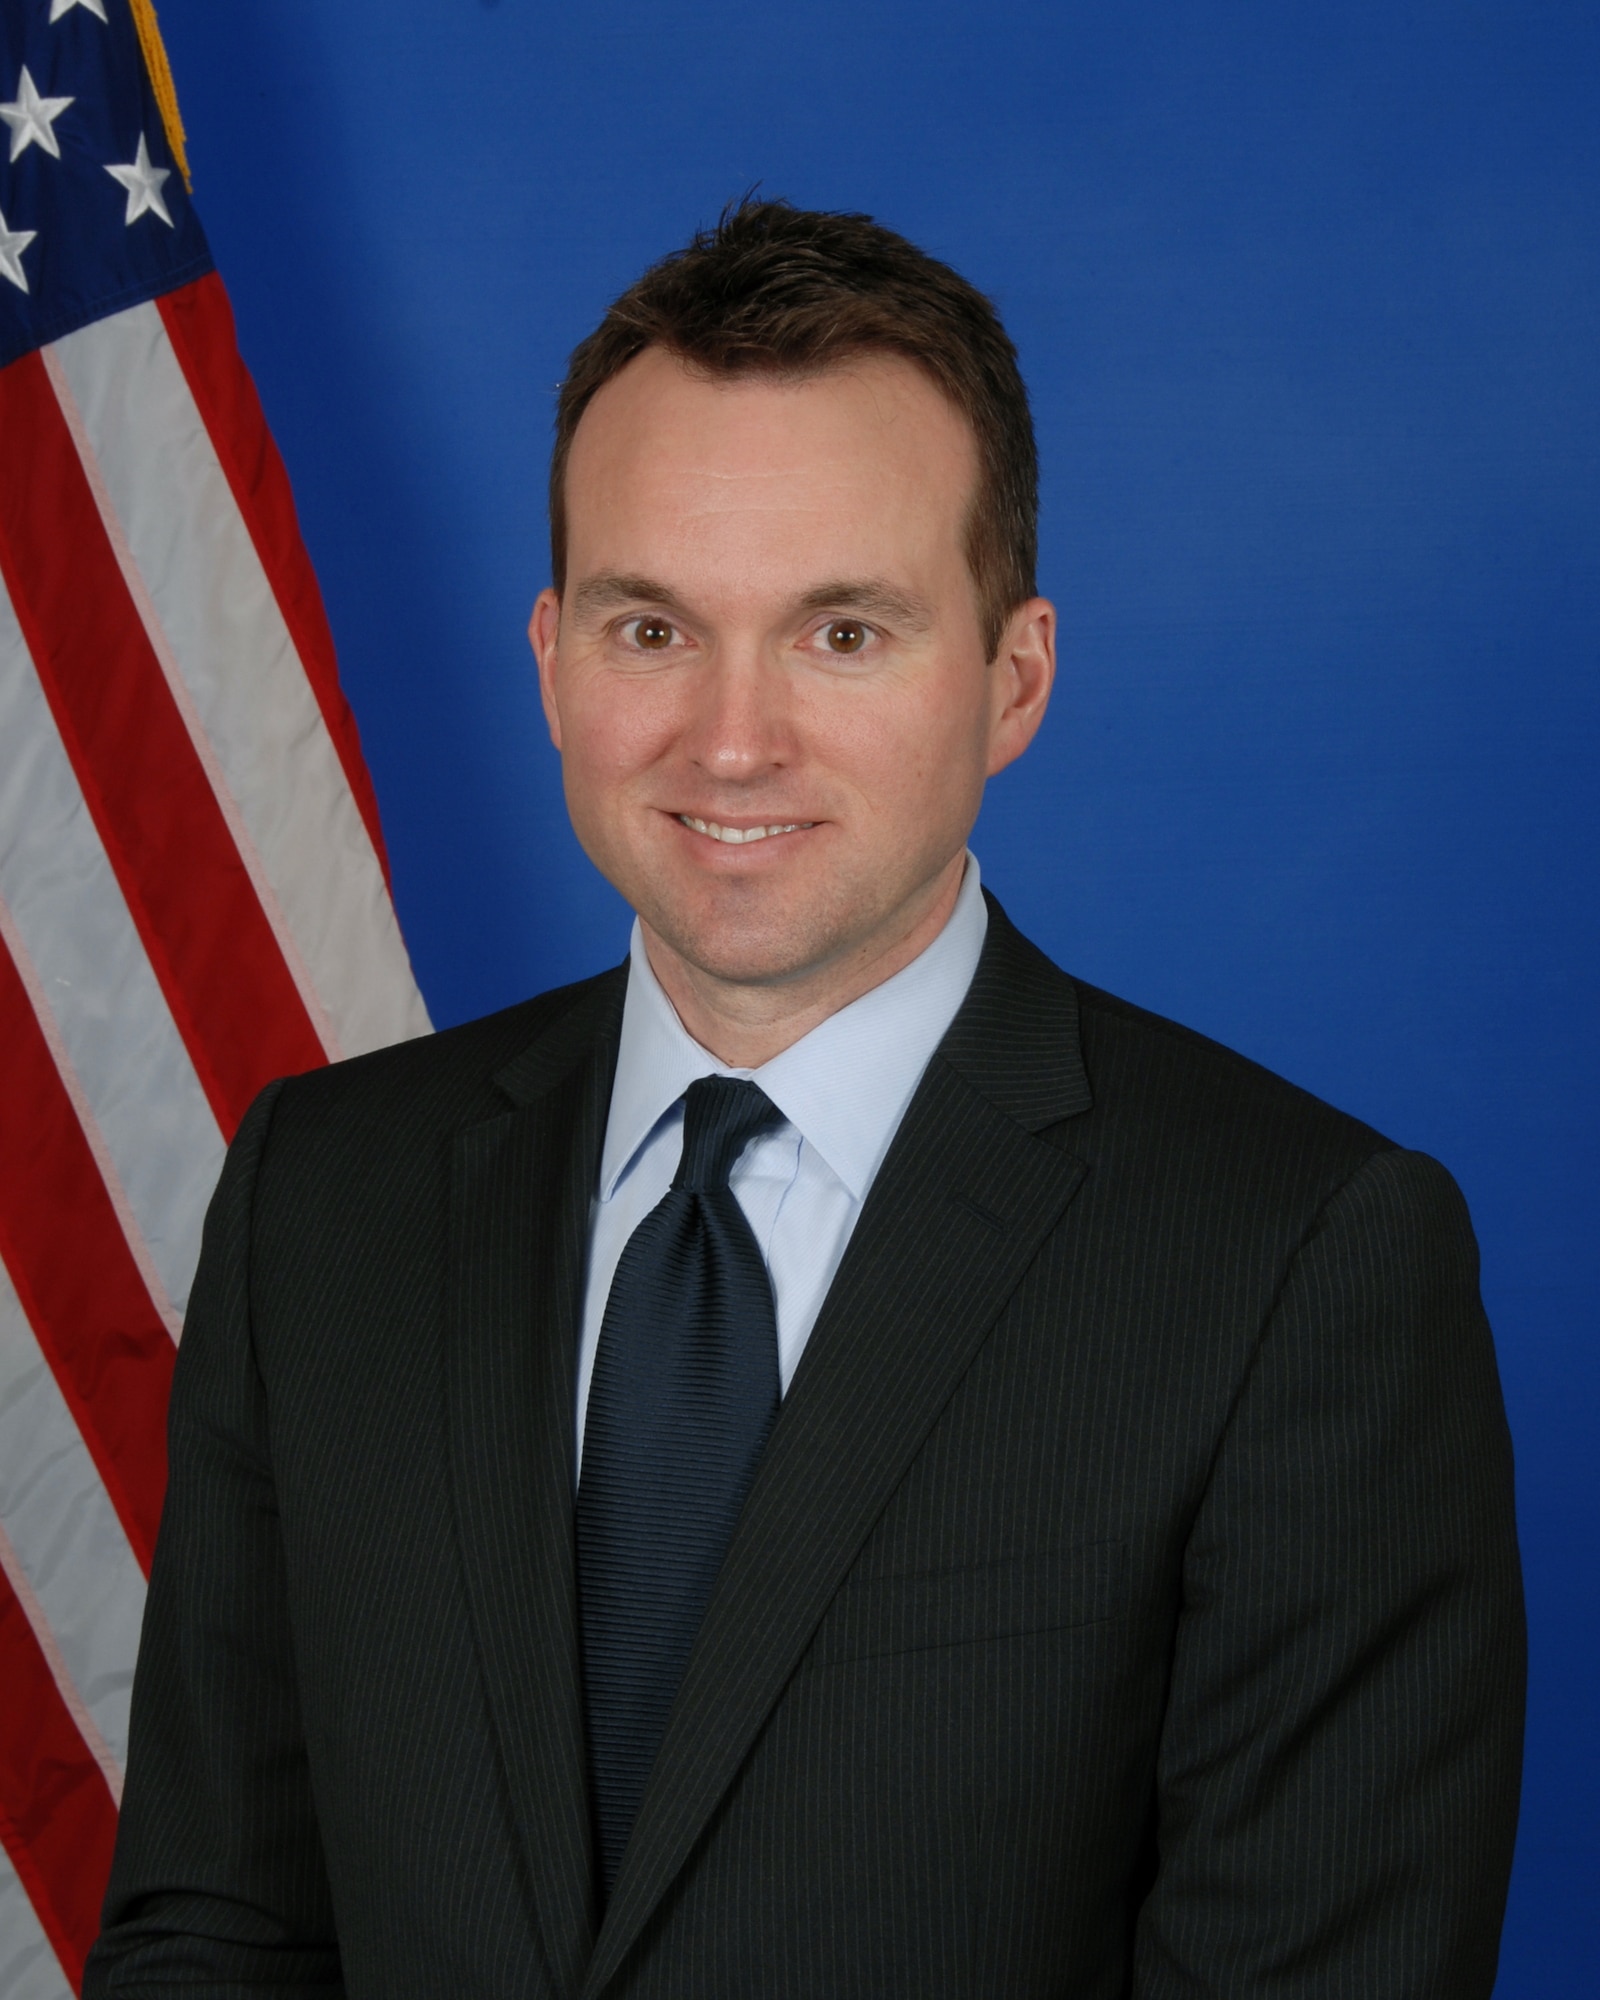 President Barack Obama announced Aug. 1 that he intends to nominate Eric Fanning, seen here in his official photograph, to be the next Under Secretary of the Air Force.  Fanning is the Deputy Under Secretary and Deputy Chief Management Officer of the Department of the Navy, previously holding positions with the House Armed Services Committee, the White House, CBS News, the Commission on the Prevention of Weapons of Mass Destruction
Proliferation and Terrorism, Business Executives for National Security, and
the Office of the Secretary of Defense. (Courtesy photo)